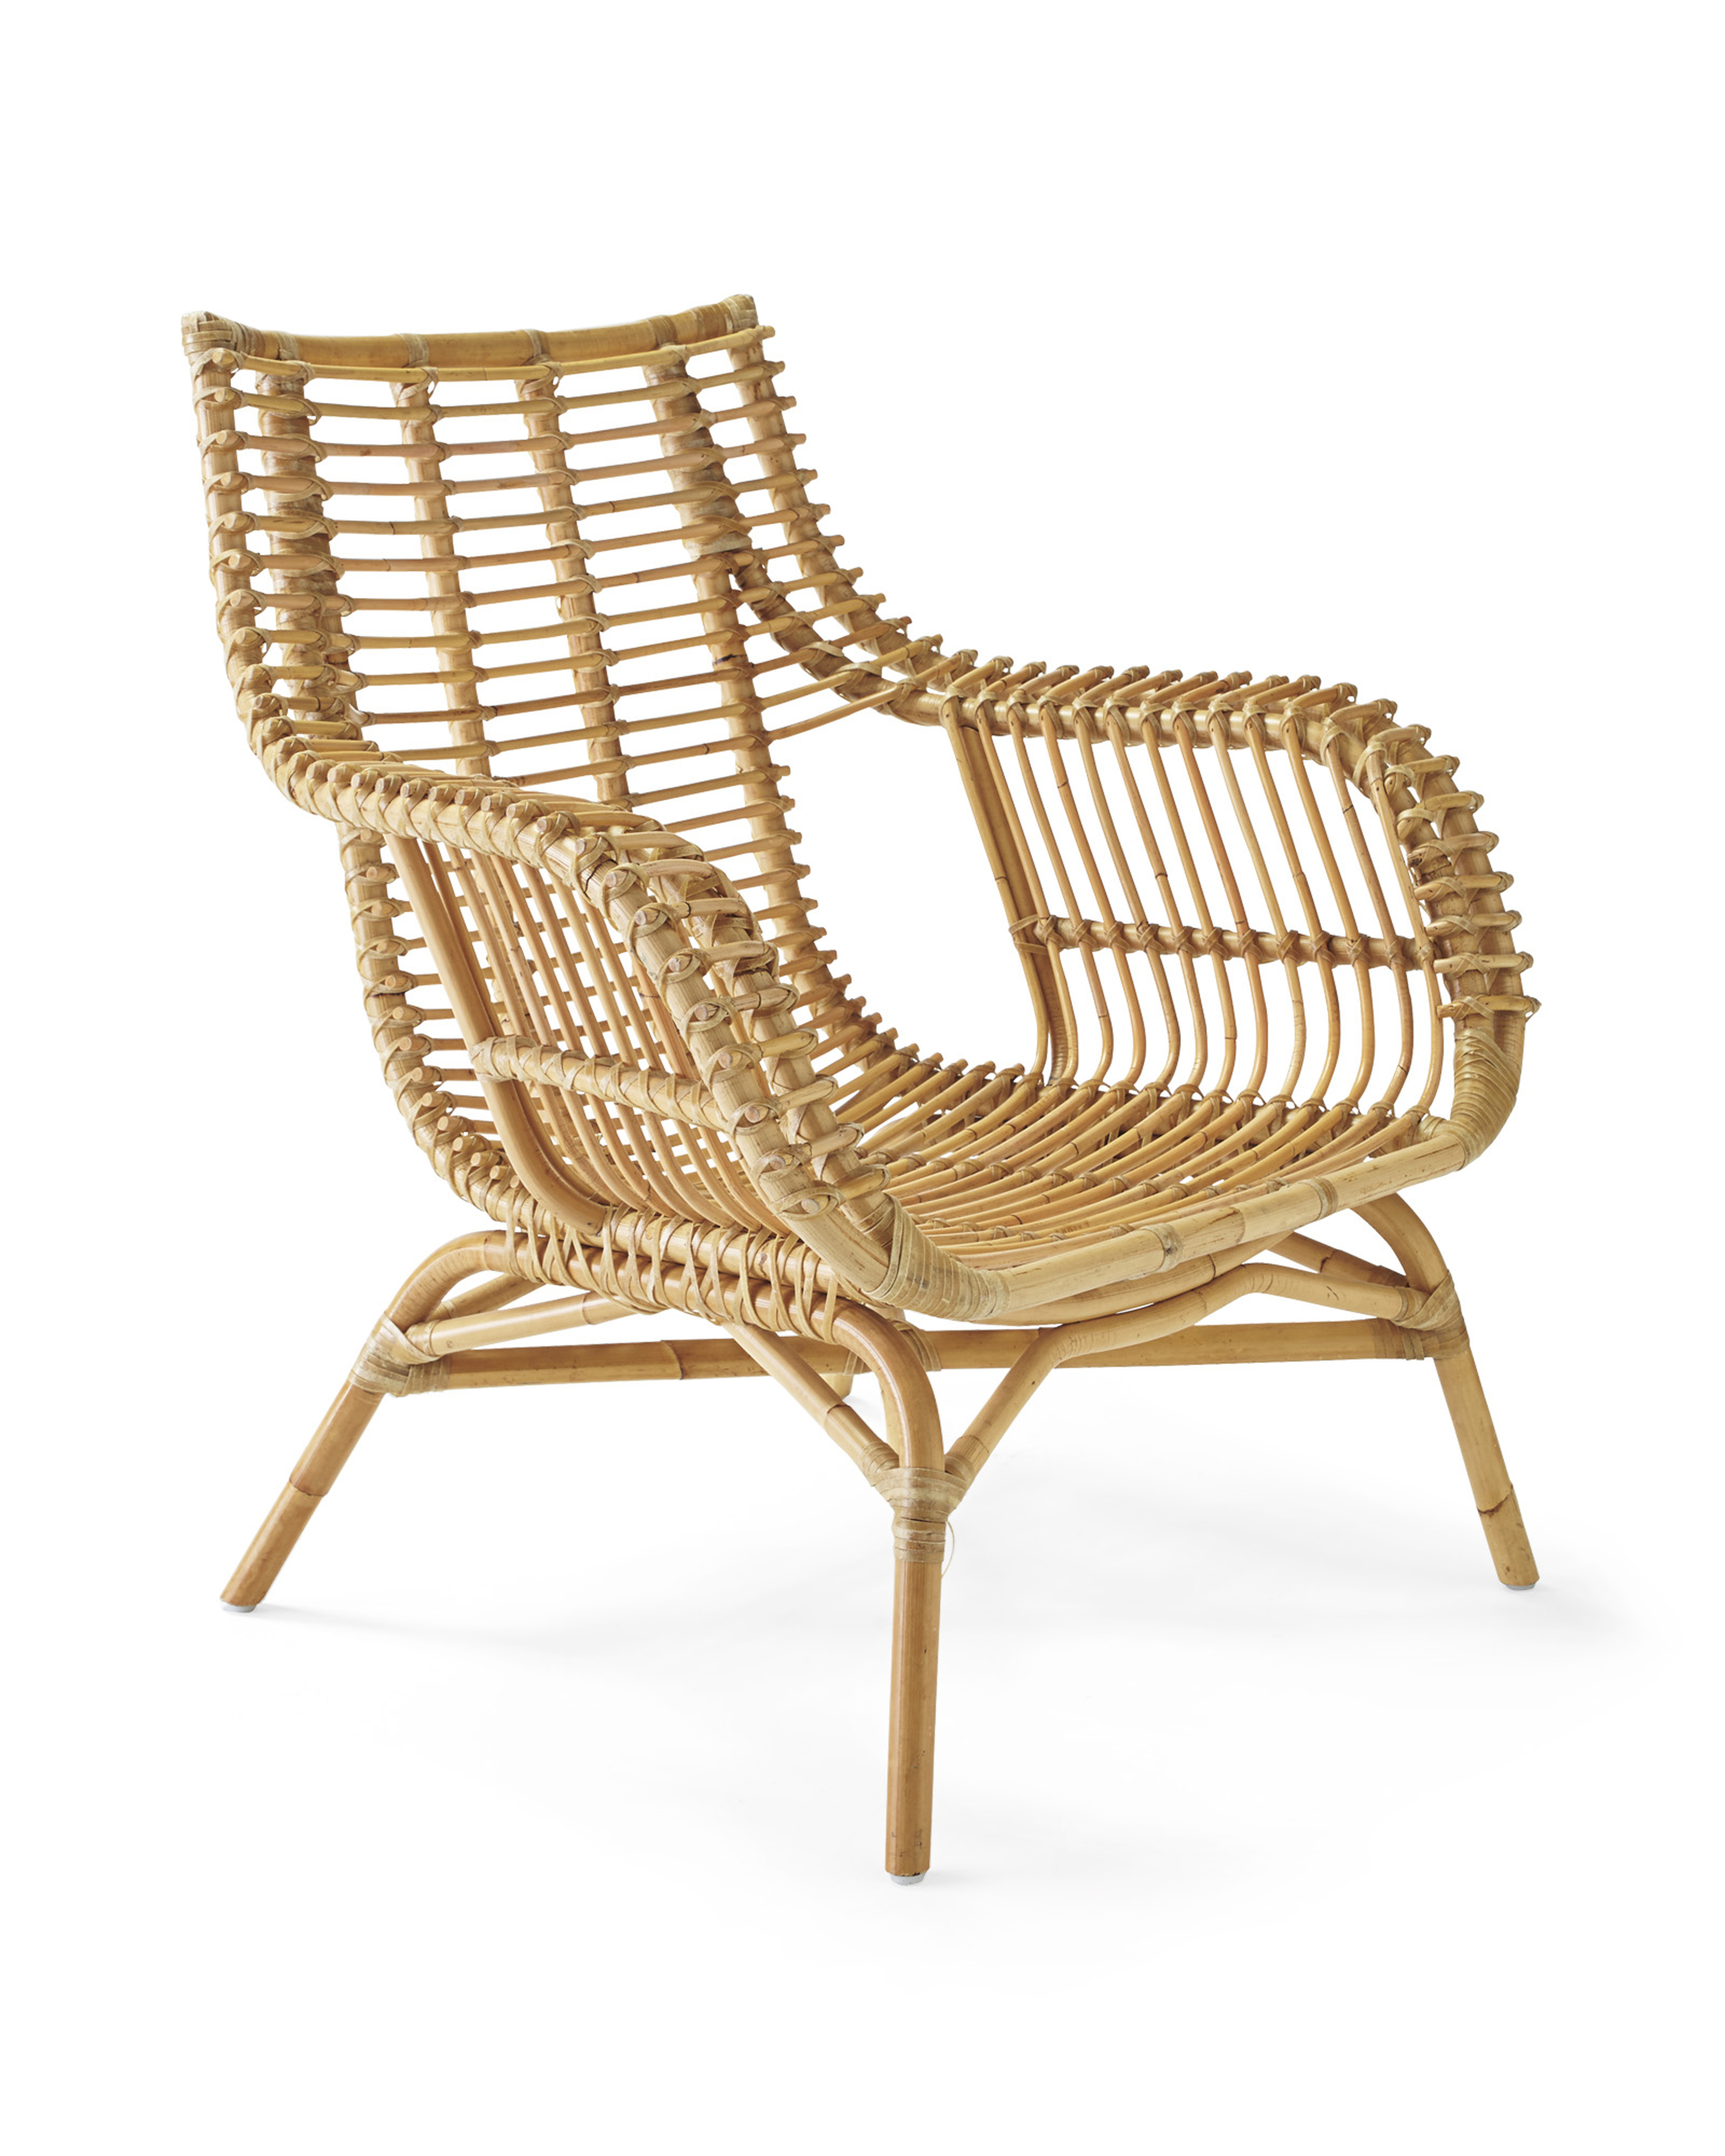 Venice Rattan Chair - Serena and Lily